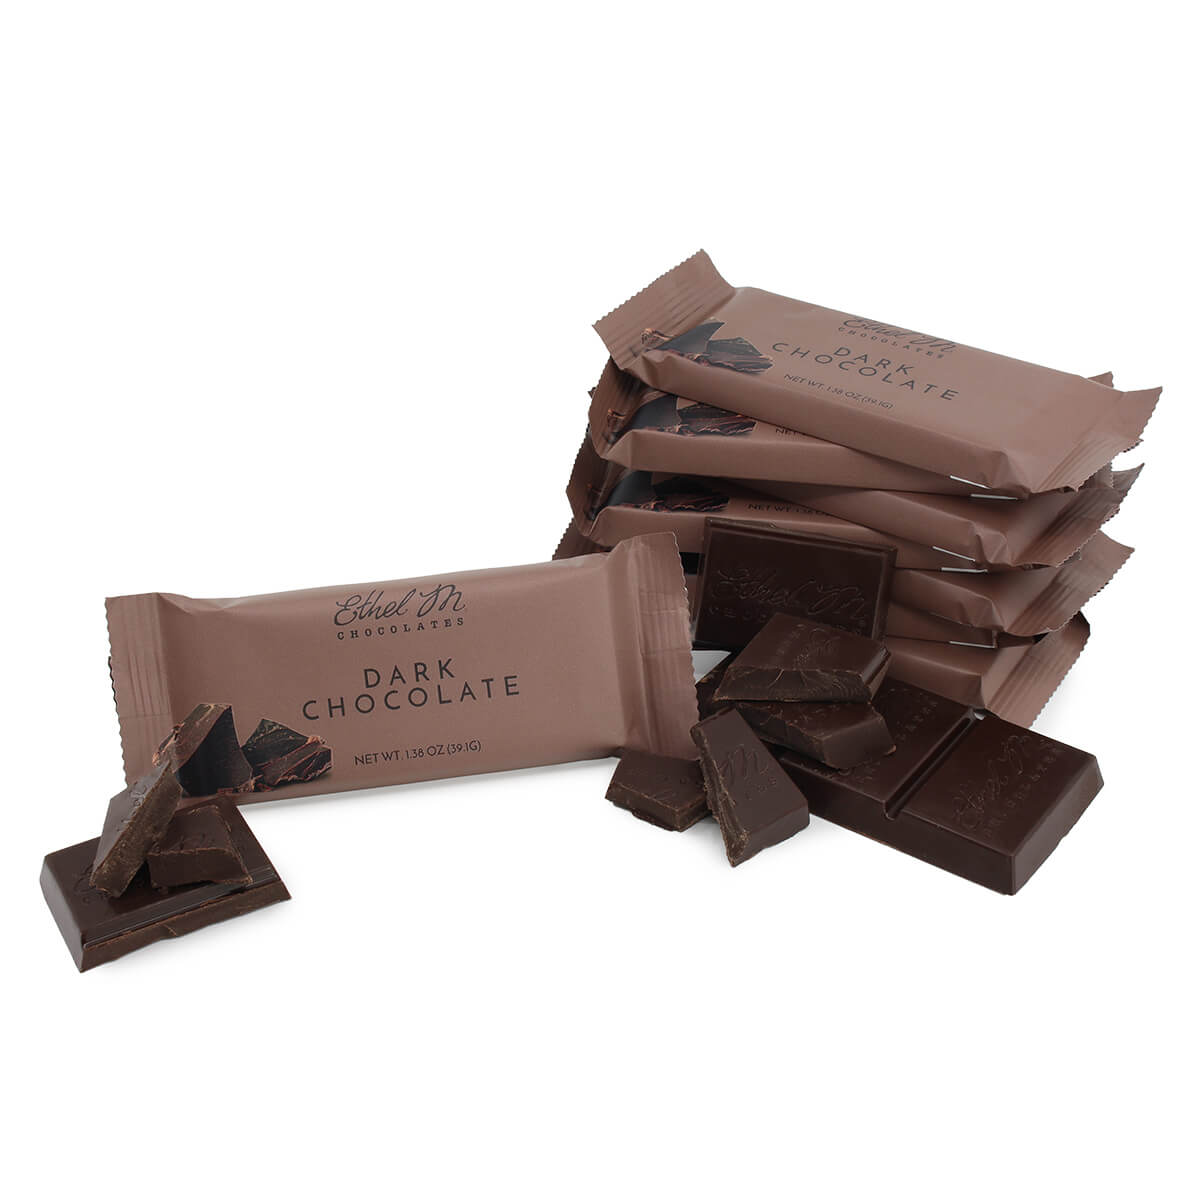 Delight on our Rich, Bittersweet, Premium Ethel M Dark Chocolate Bar. It can be purchased individually, as a set of 8, or in box of 24.